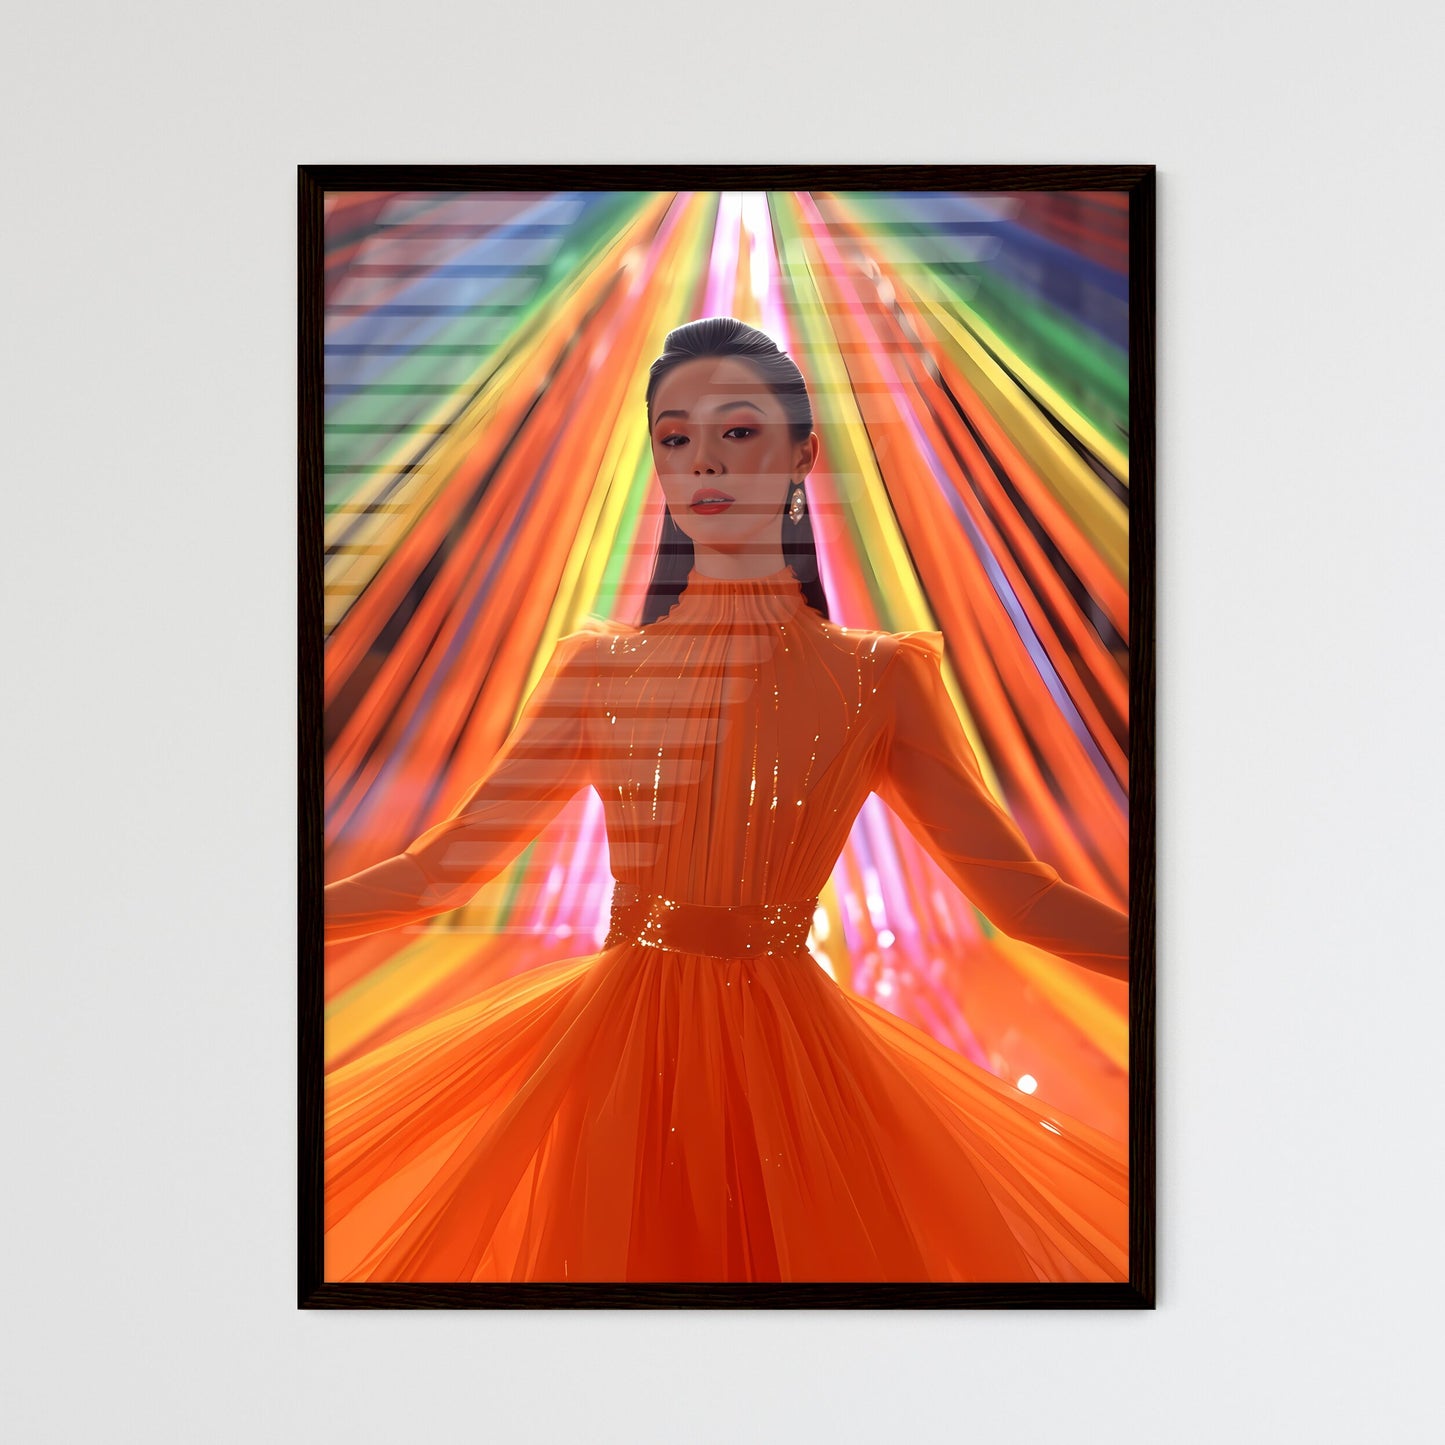 Posters and announcements design - Art print of a woman in an orange dress Default Title